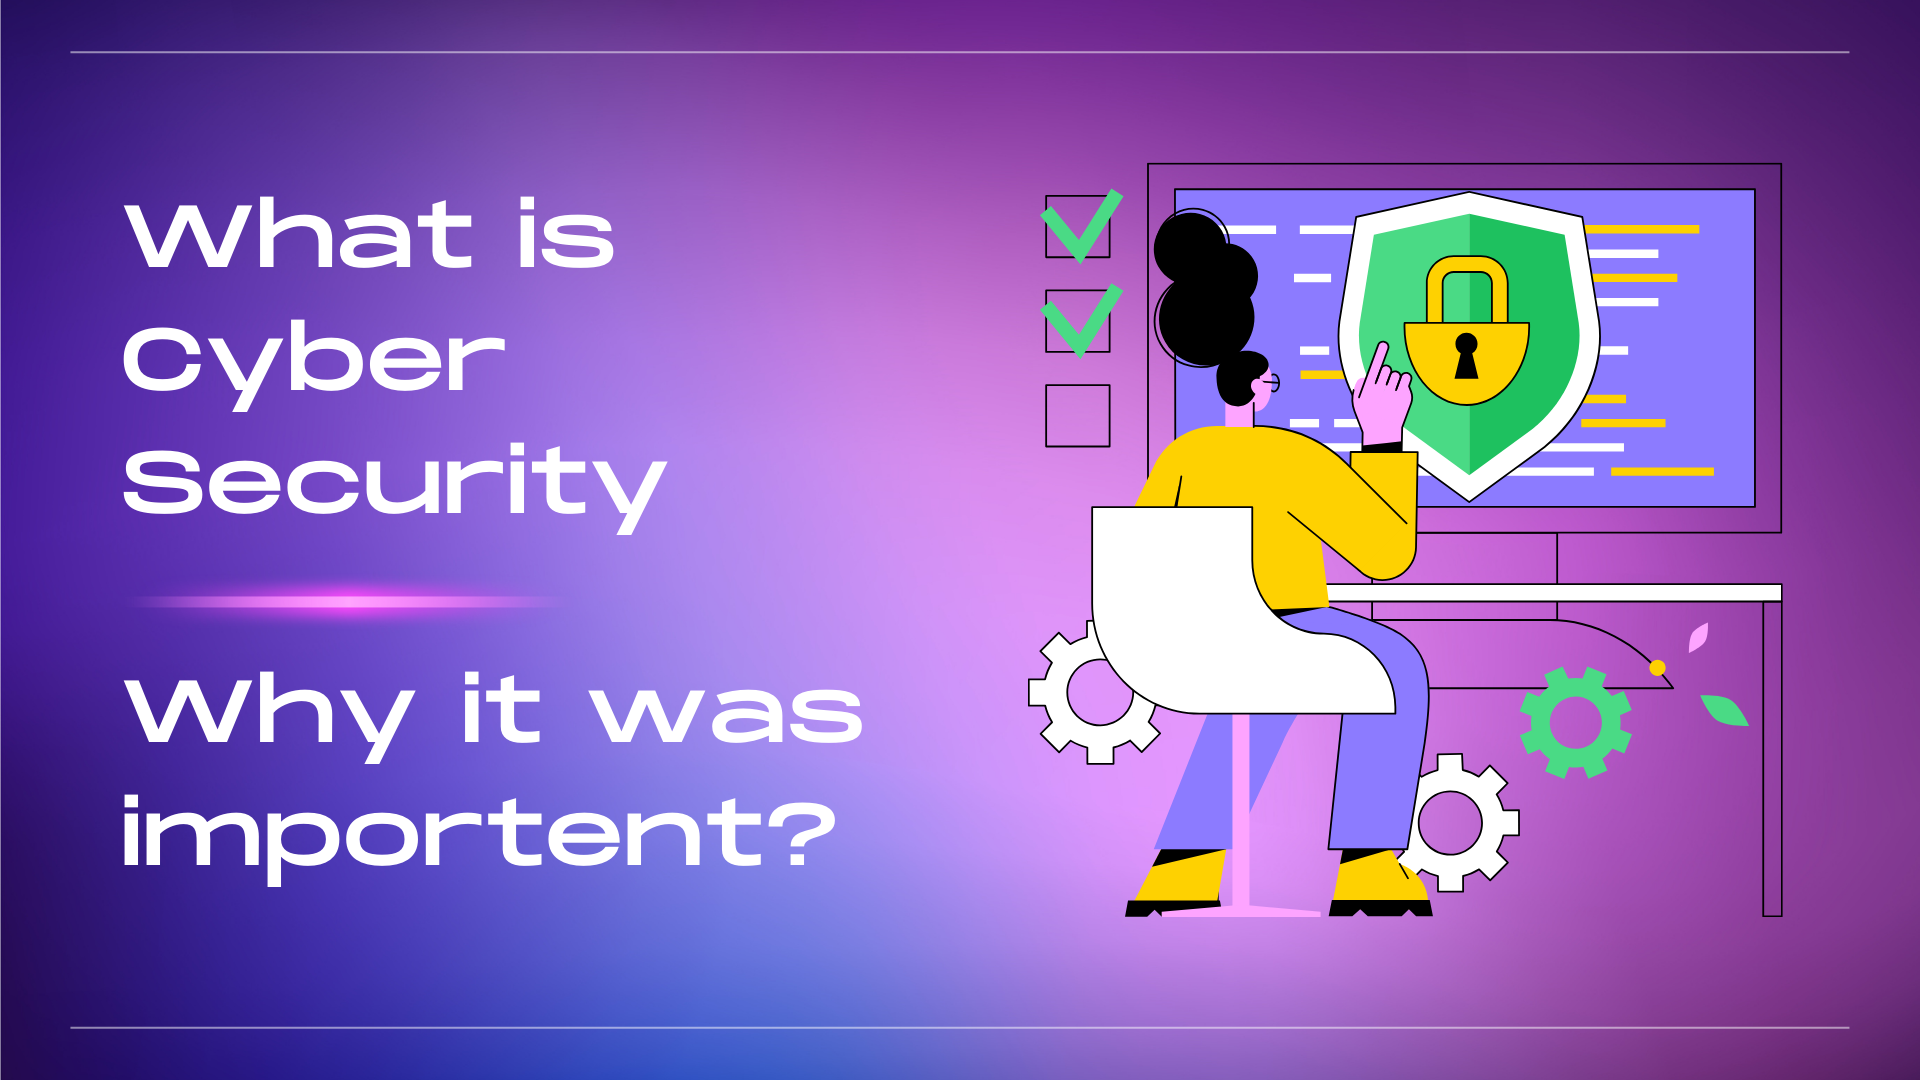 Cyber Security - Why Cyber Security is Important